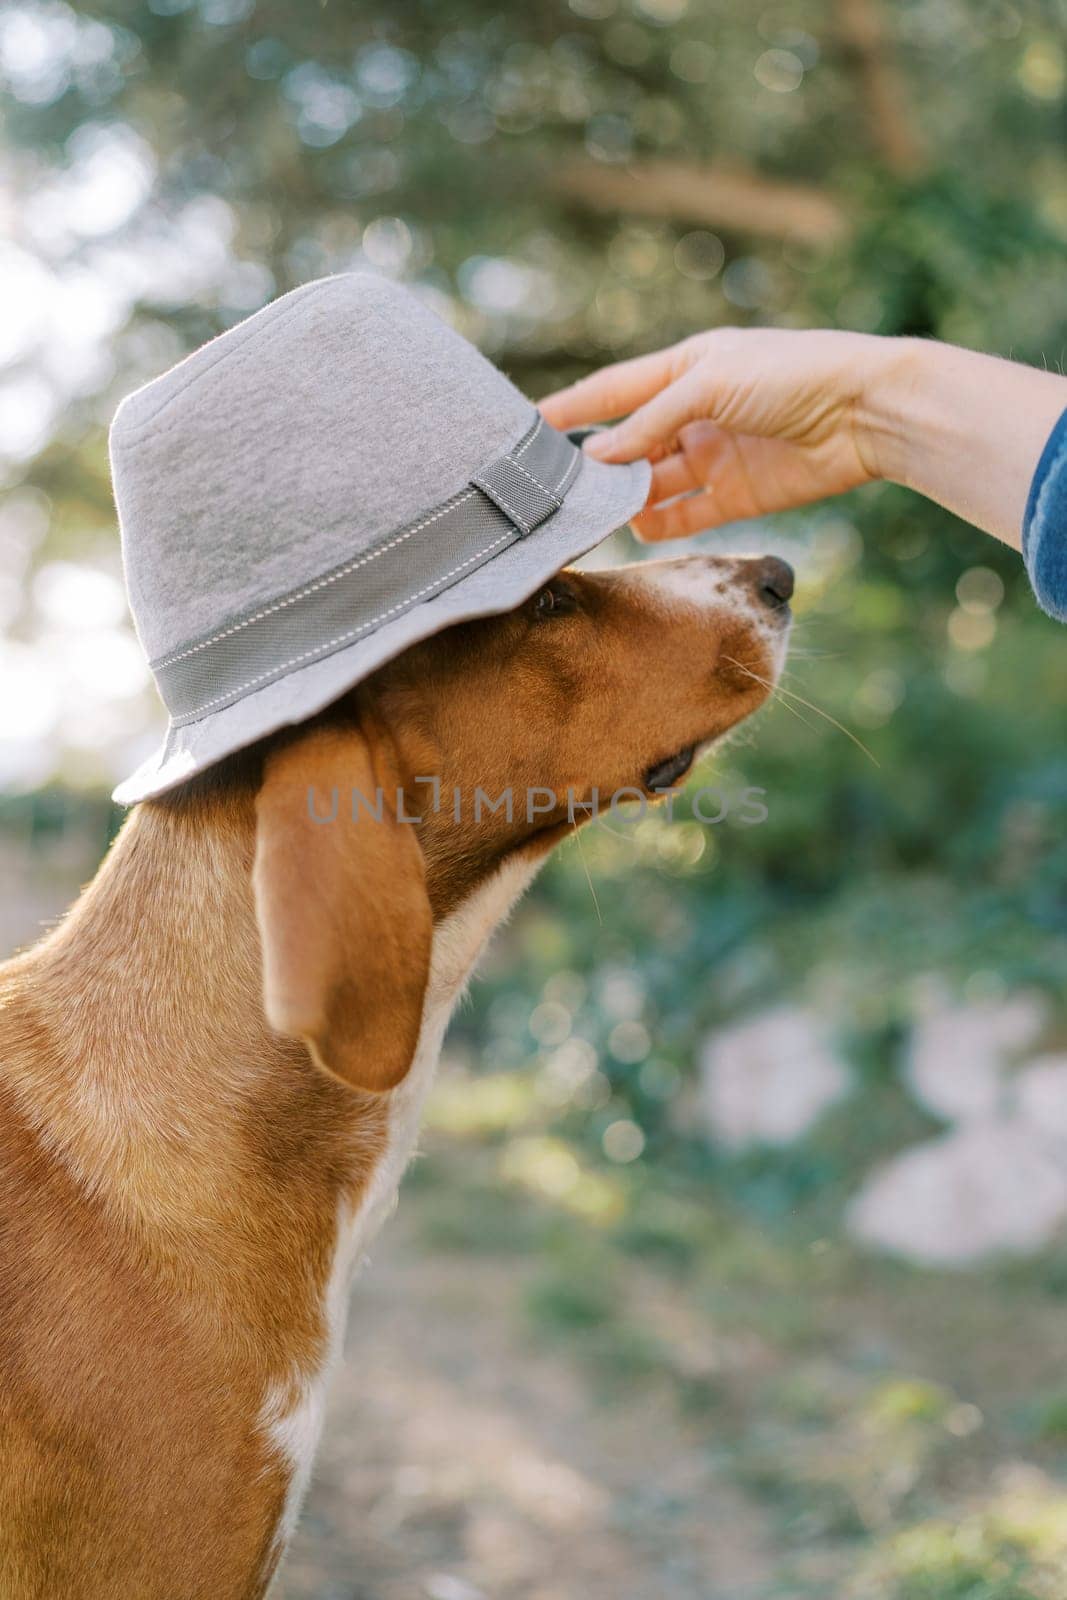 Woman puts a gray hat on the head of a brown dog by Nadtochiy